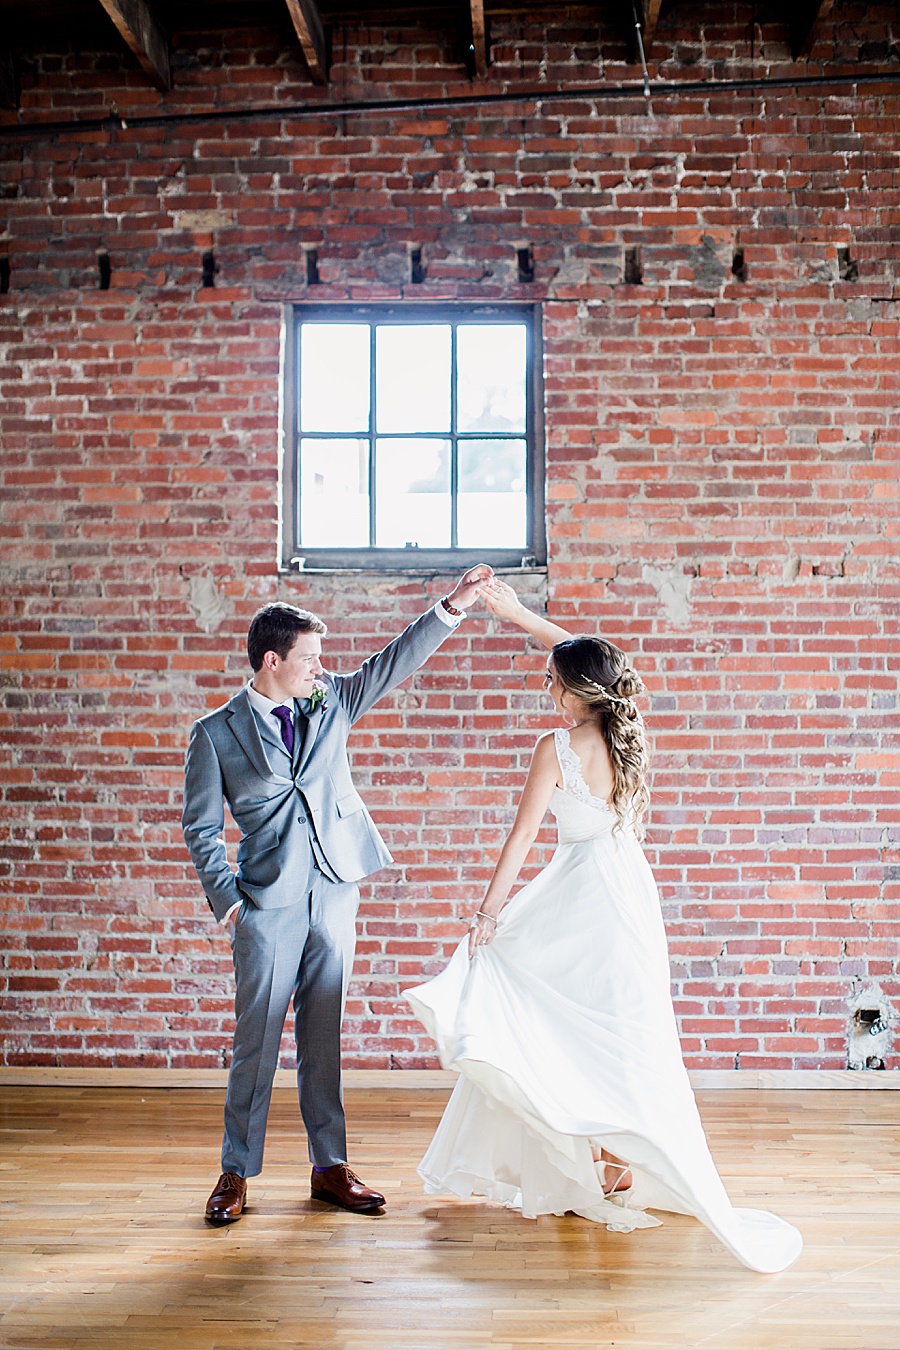 Groom twirling bride by Knoxville Photographer, Amanda May Photos.